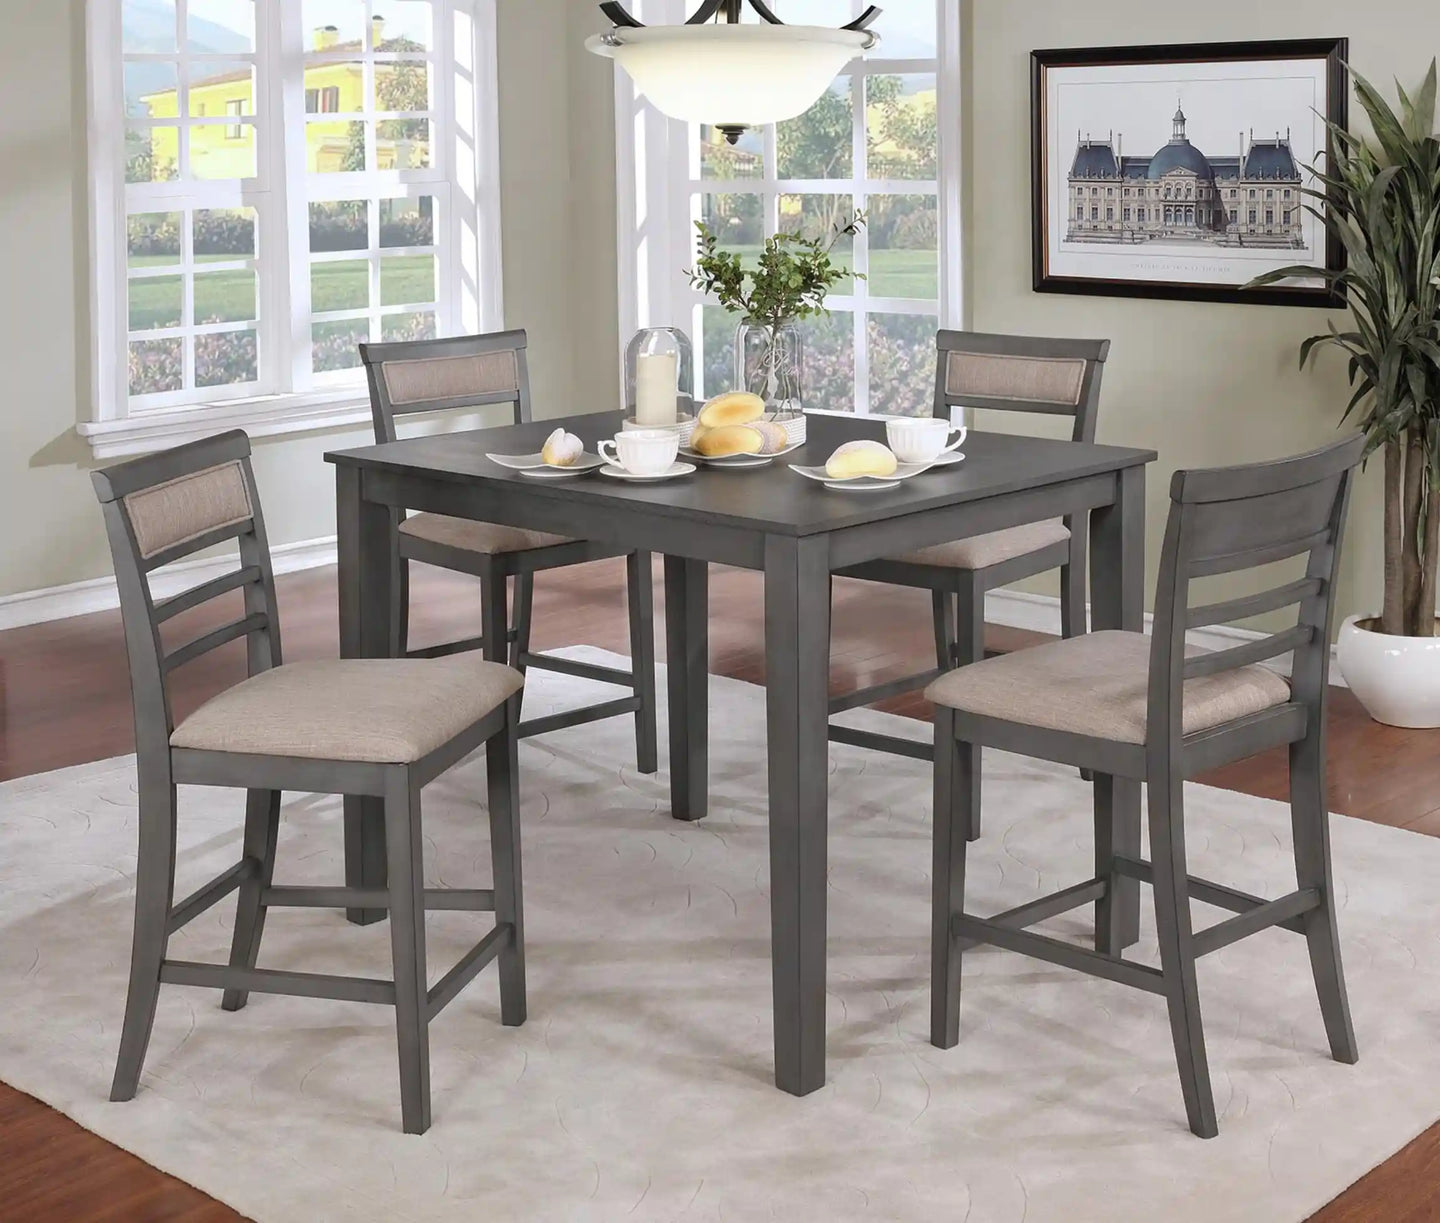 Furniture of America Adinna Transitional 5-Piece Solid Wood Counter Height Dining Set - IDF-3607PT-5PK